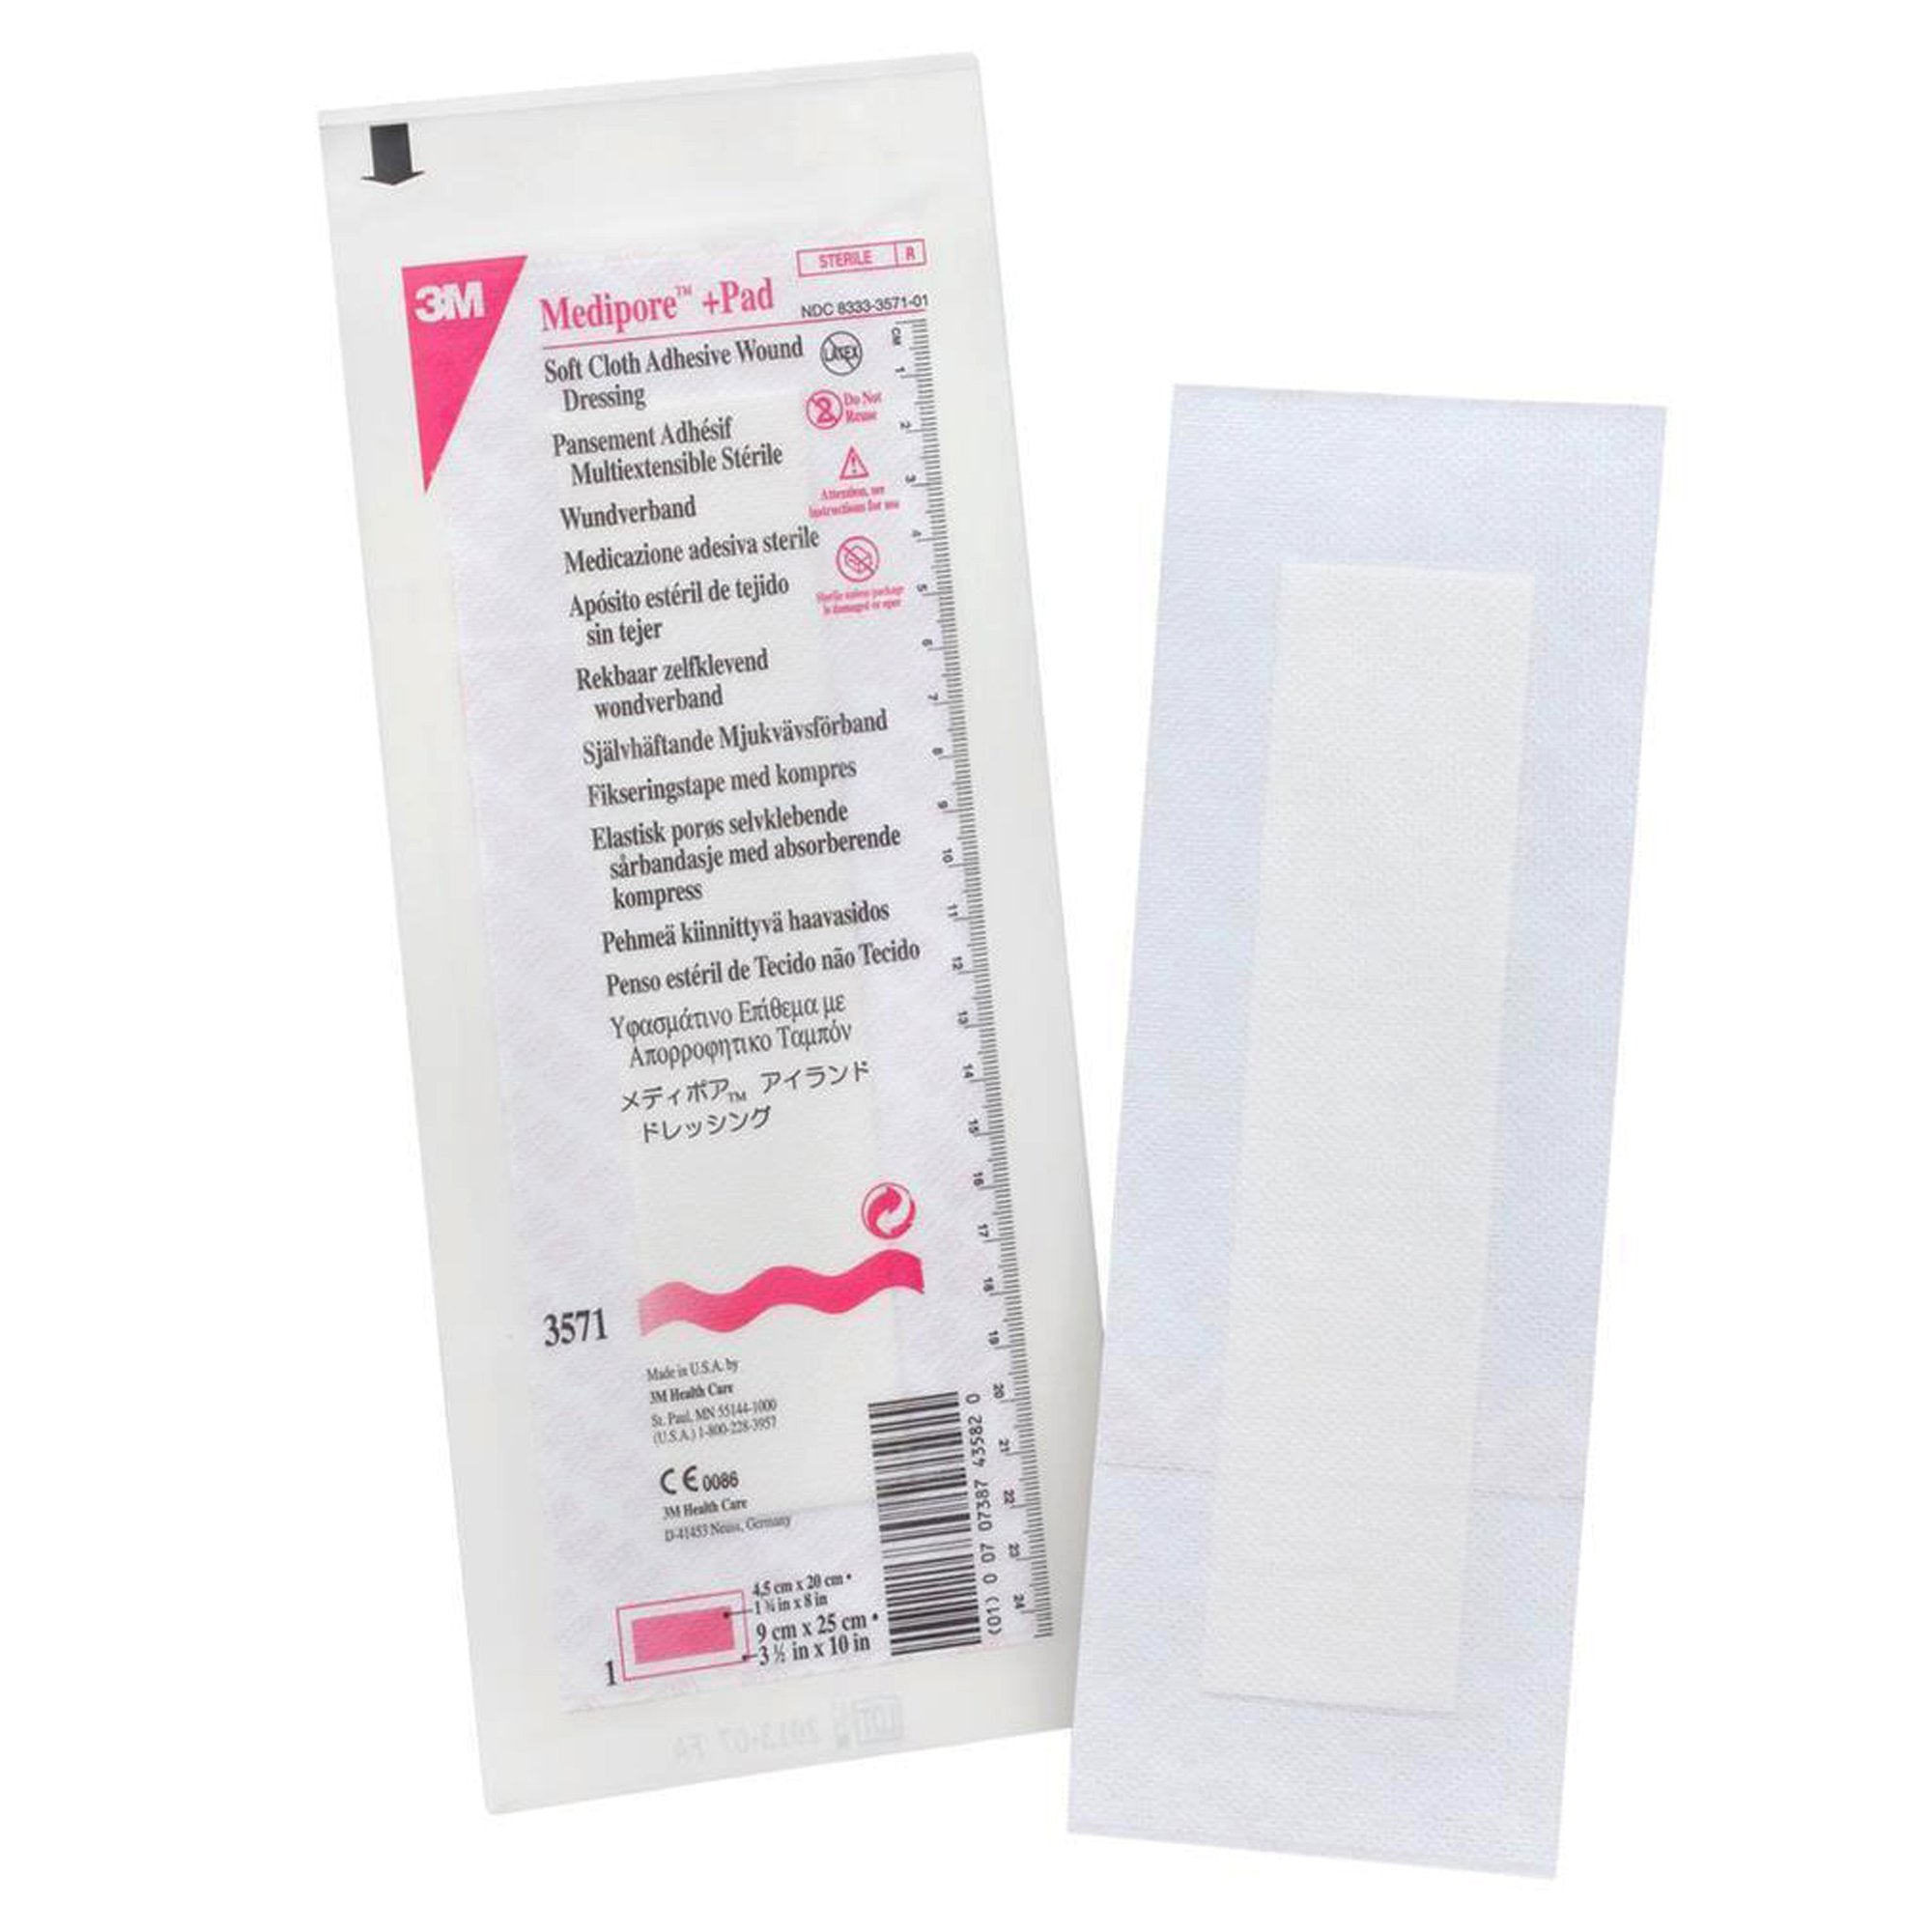 3M Medipore Adhesive Dressing 3571 - Soft Cloth, Sterile, Hypoallergenic, Rectangle, White - 3 1/2" x 10" Pad, Pack of 10